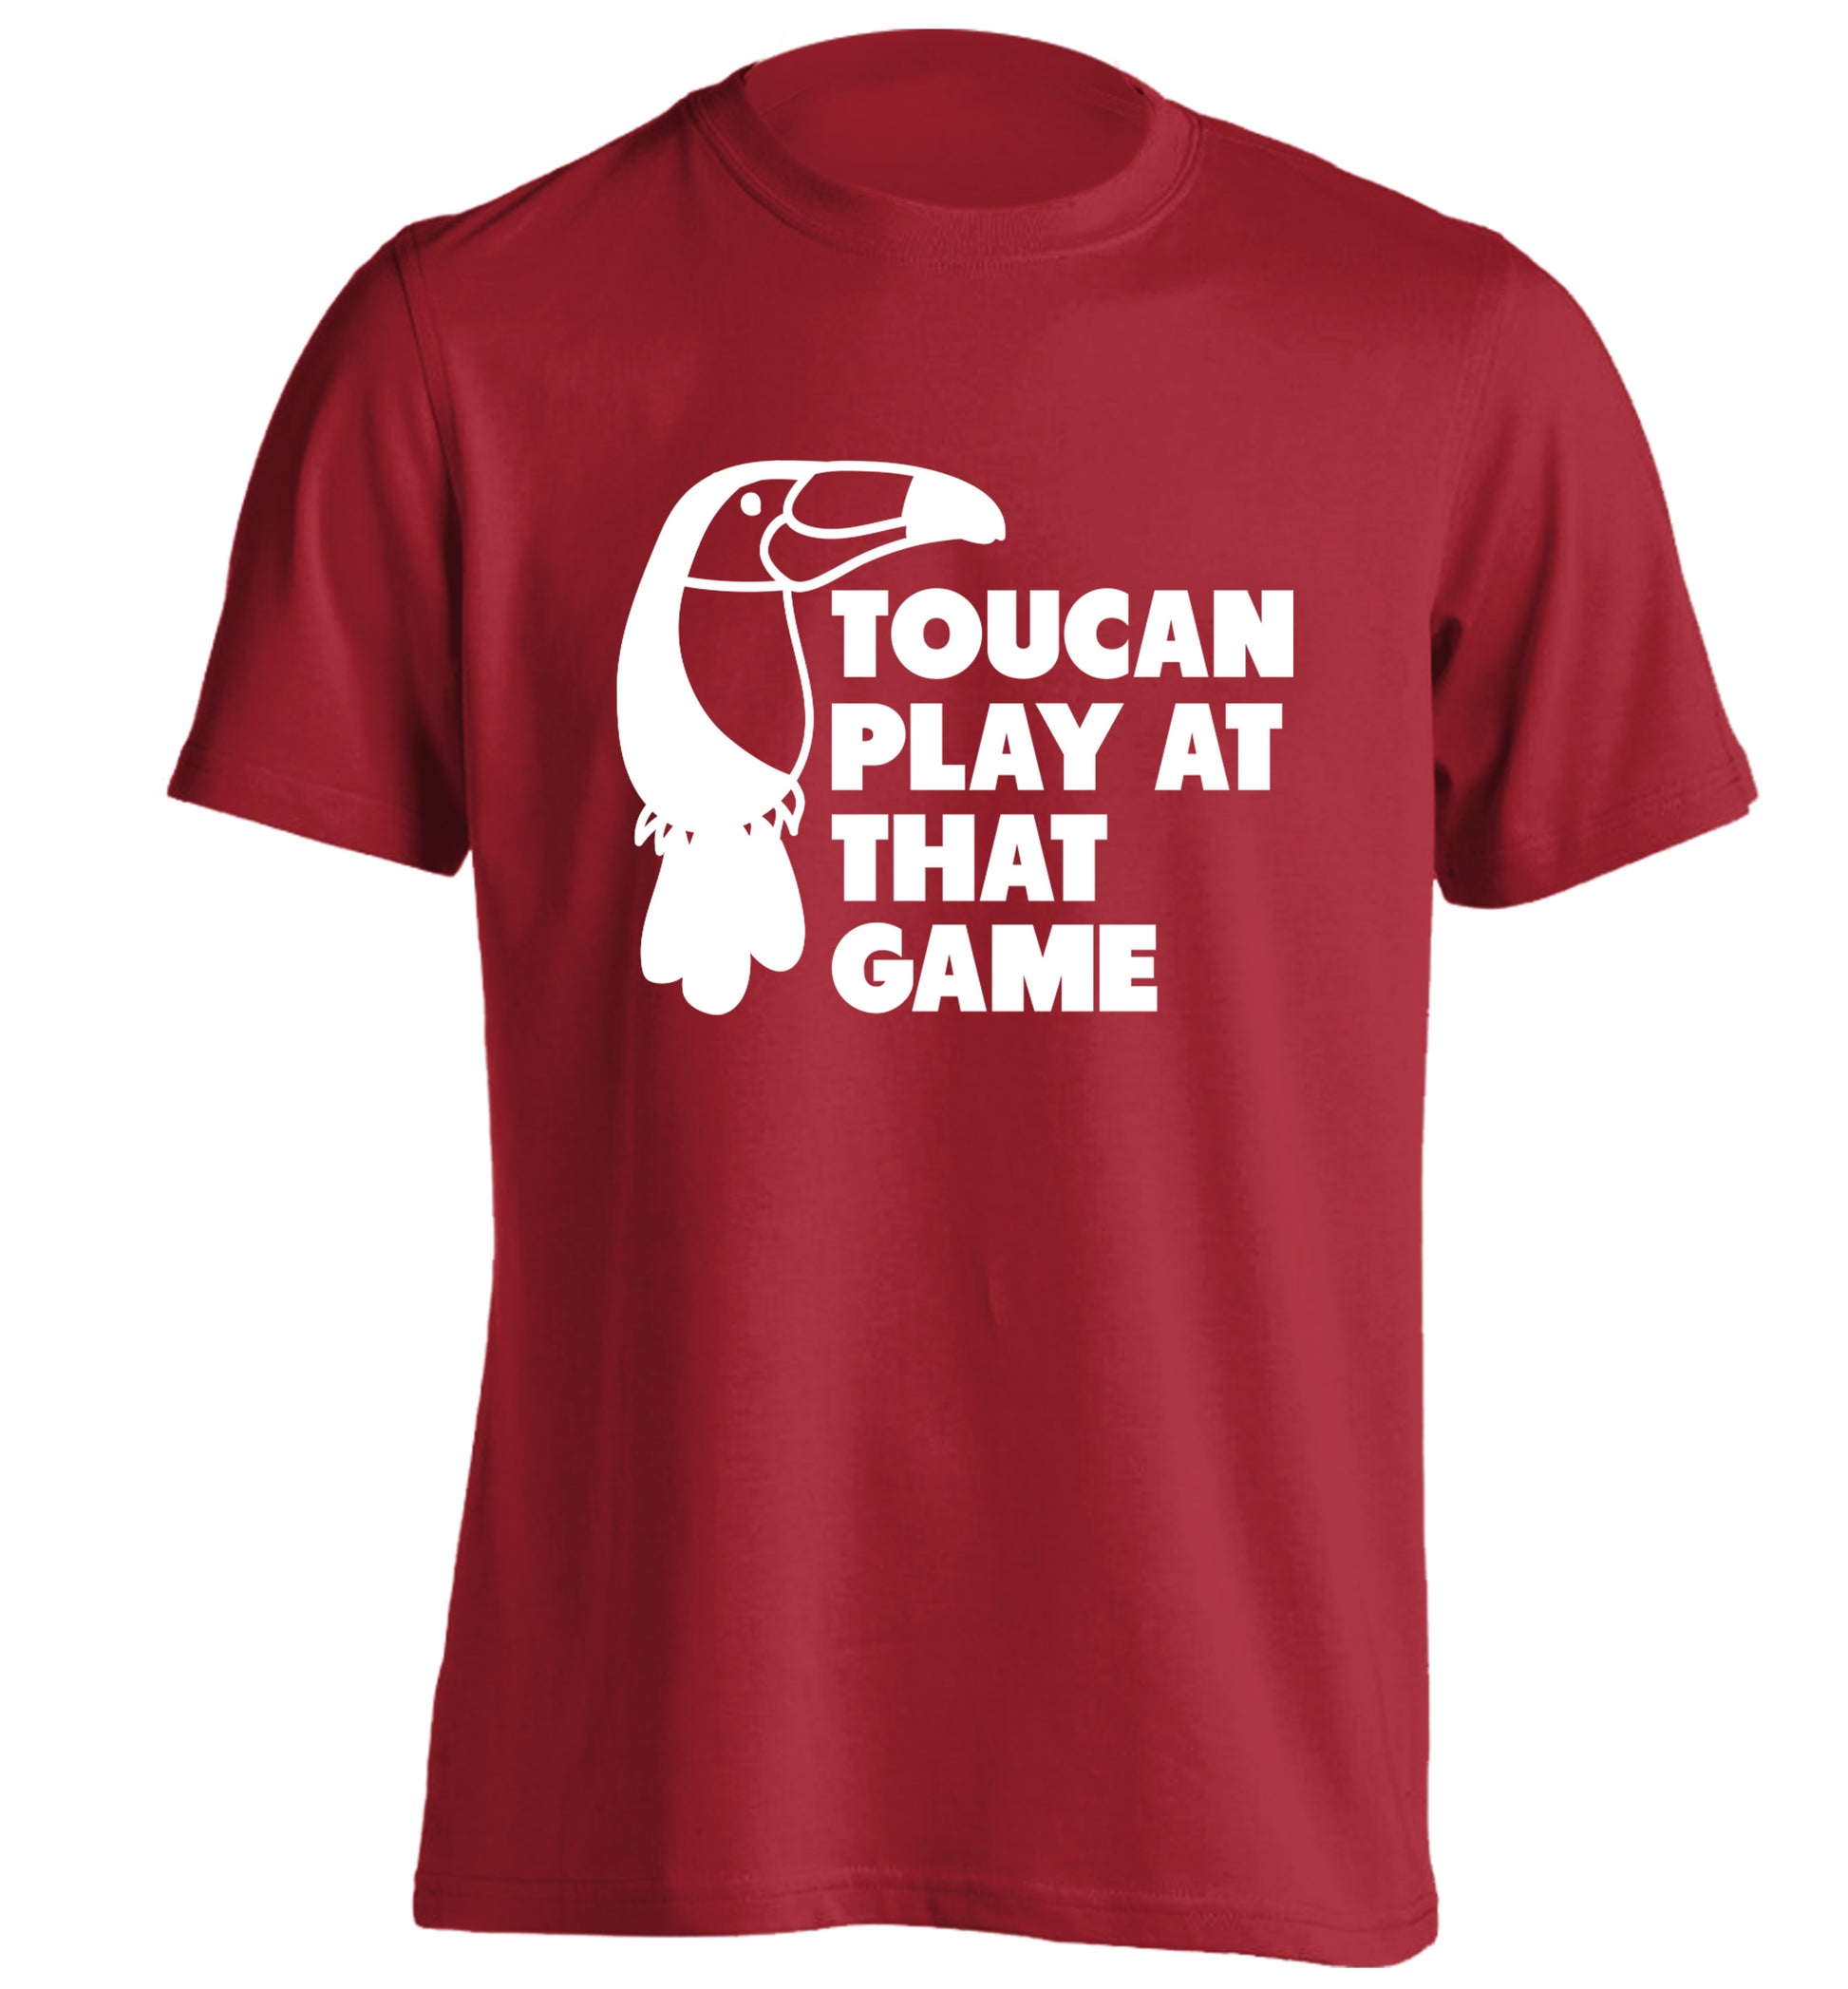 Toucan play at that game adults unisex red Tshirt 2XL